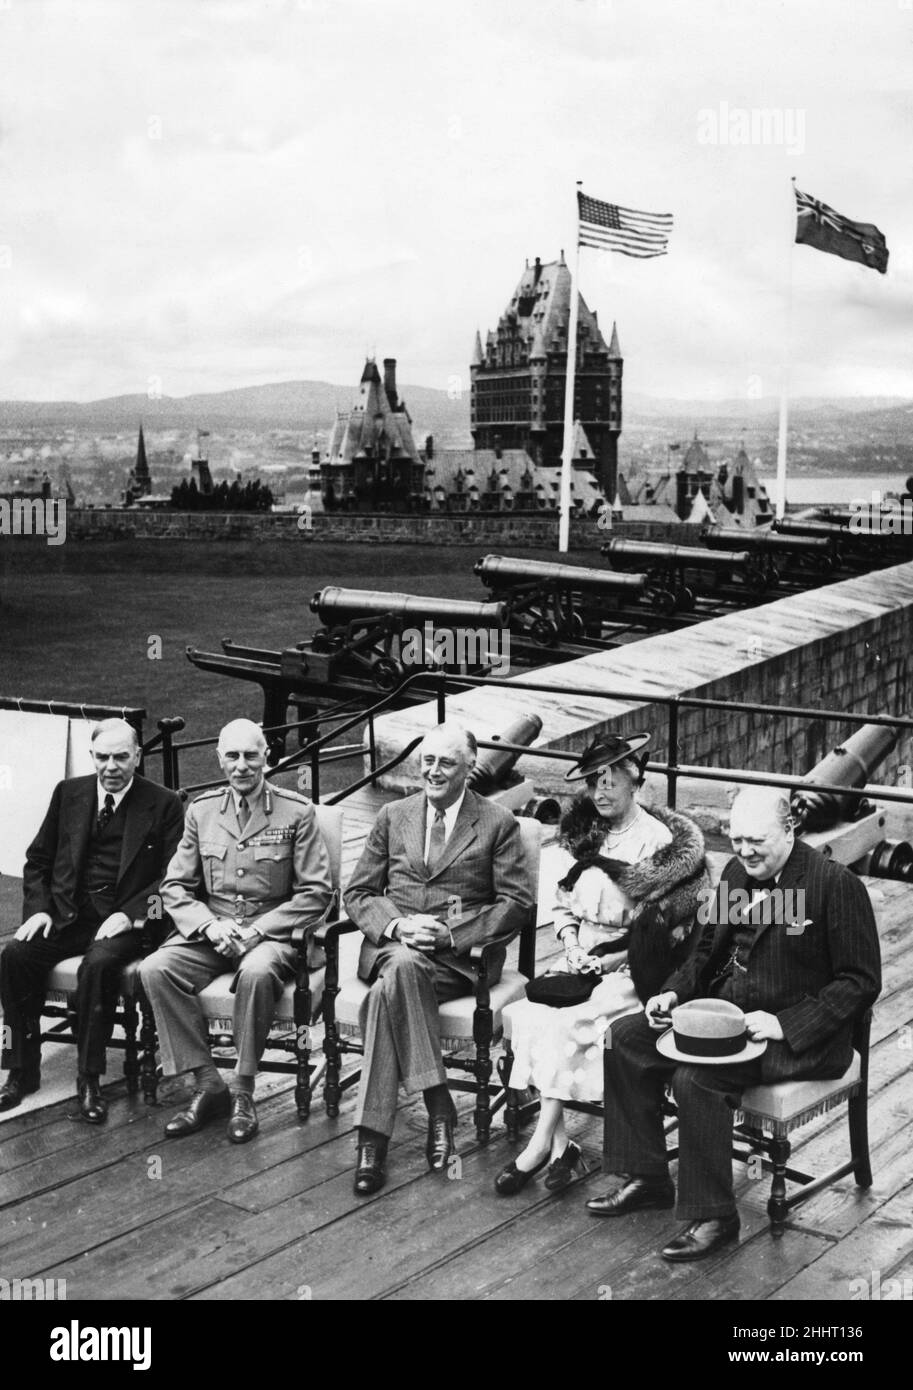 Roosevelt - Churchill Quebec meeting.President Roosevelt, Winston Churchill and members of their party on the terrace at the Citadel overlooking Quebec.  In the background can be seen the Chateau Frontenac. Picture shows: Left to Right: Mr. Mackenzie King, the Earl of Athlone, President Roosevelt, the Countess of Sthlone and Mr. Winston Churchill. 23rd August, 1943 Stock Photo